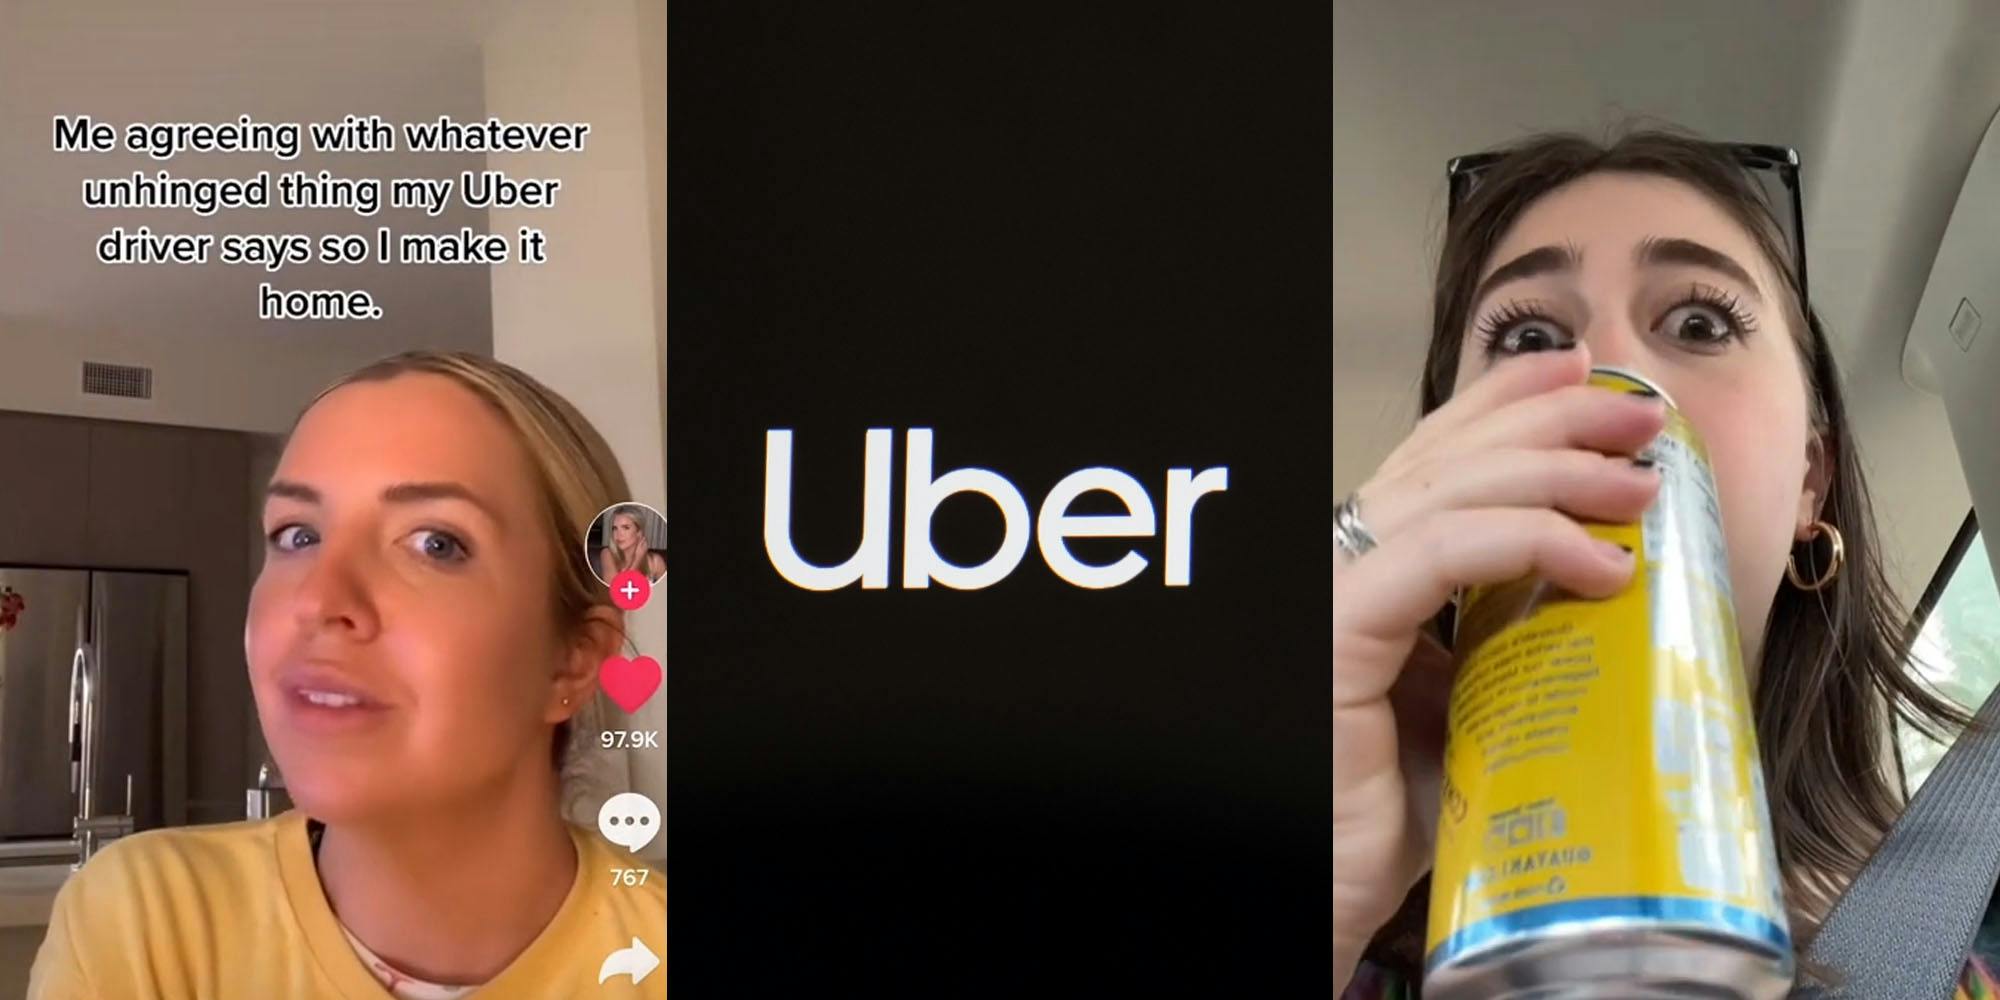 Woman tiktok caption "Me agreeing with whatever unhinged thing my Uber driver says so I make it home." (l) Uber logo on black background (c) Female drinking in car shocked expression (r)